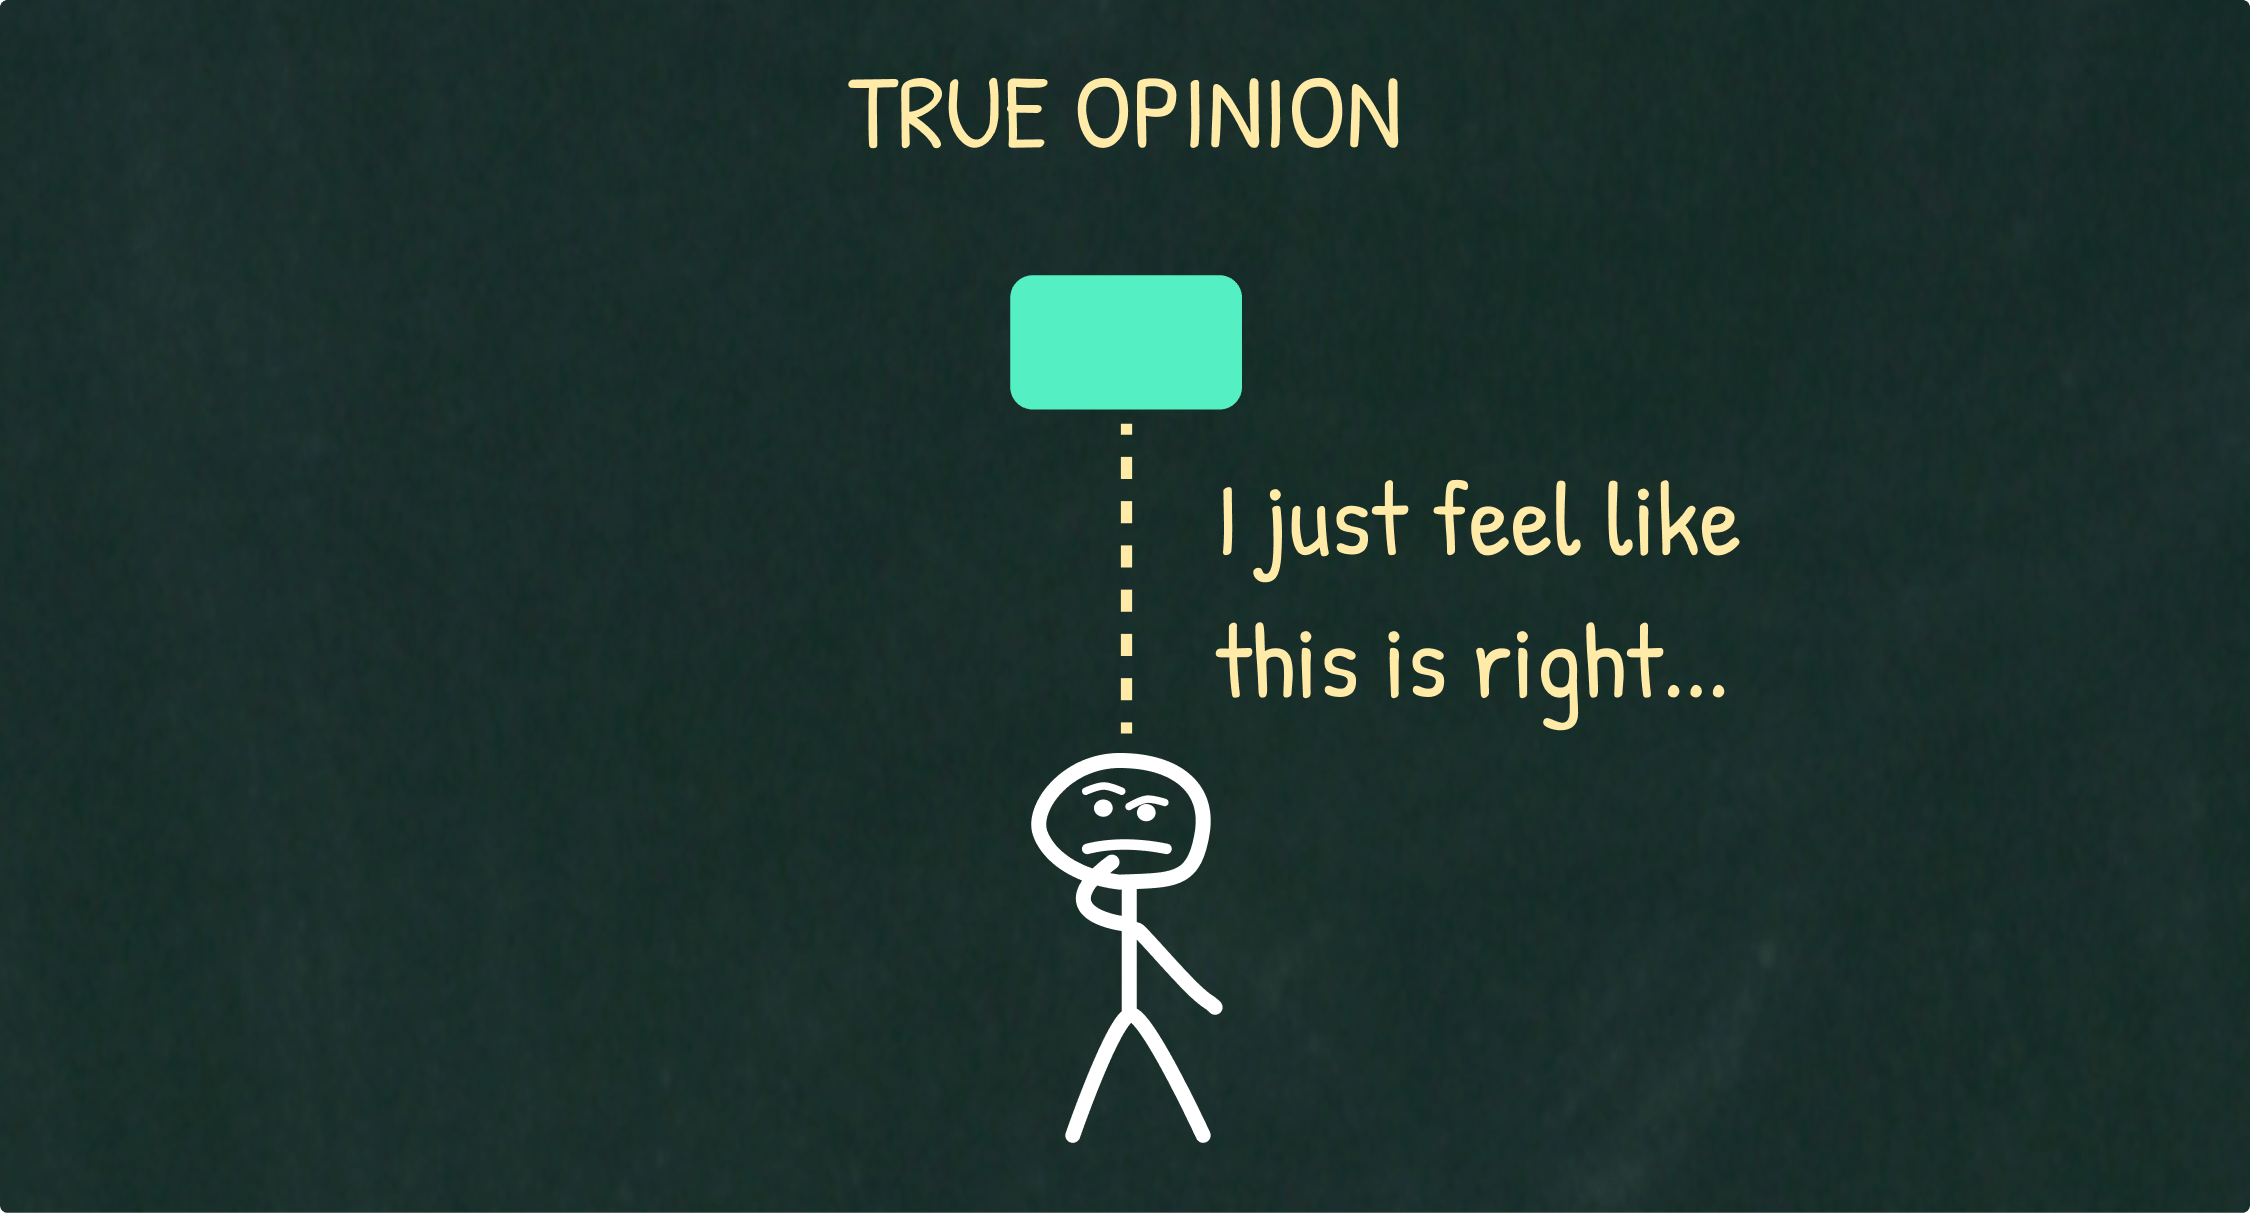 True opinion is something that feels right.